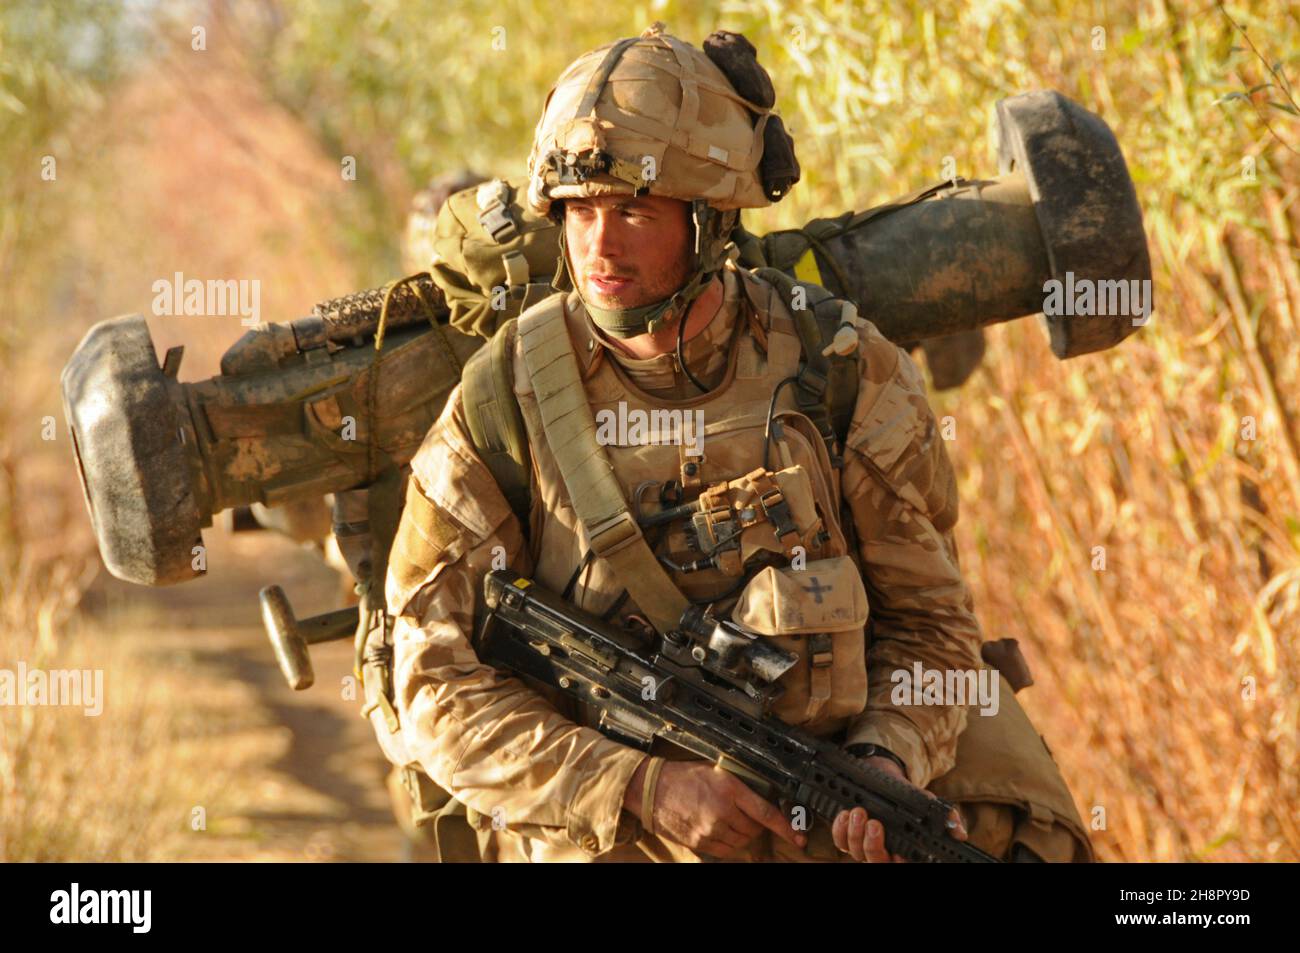 British Royal Marine commandos during Operation Sond Chara clearing Nad-e Ali District, Helmand province of insurgents December 29, 2008 in Lashkar Gah, Afghanistan. Stock Photo